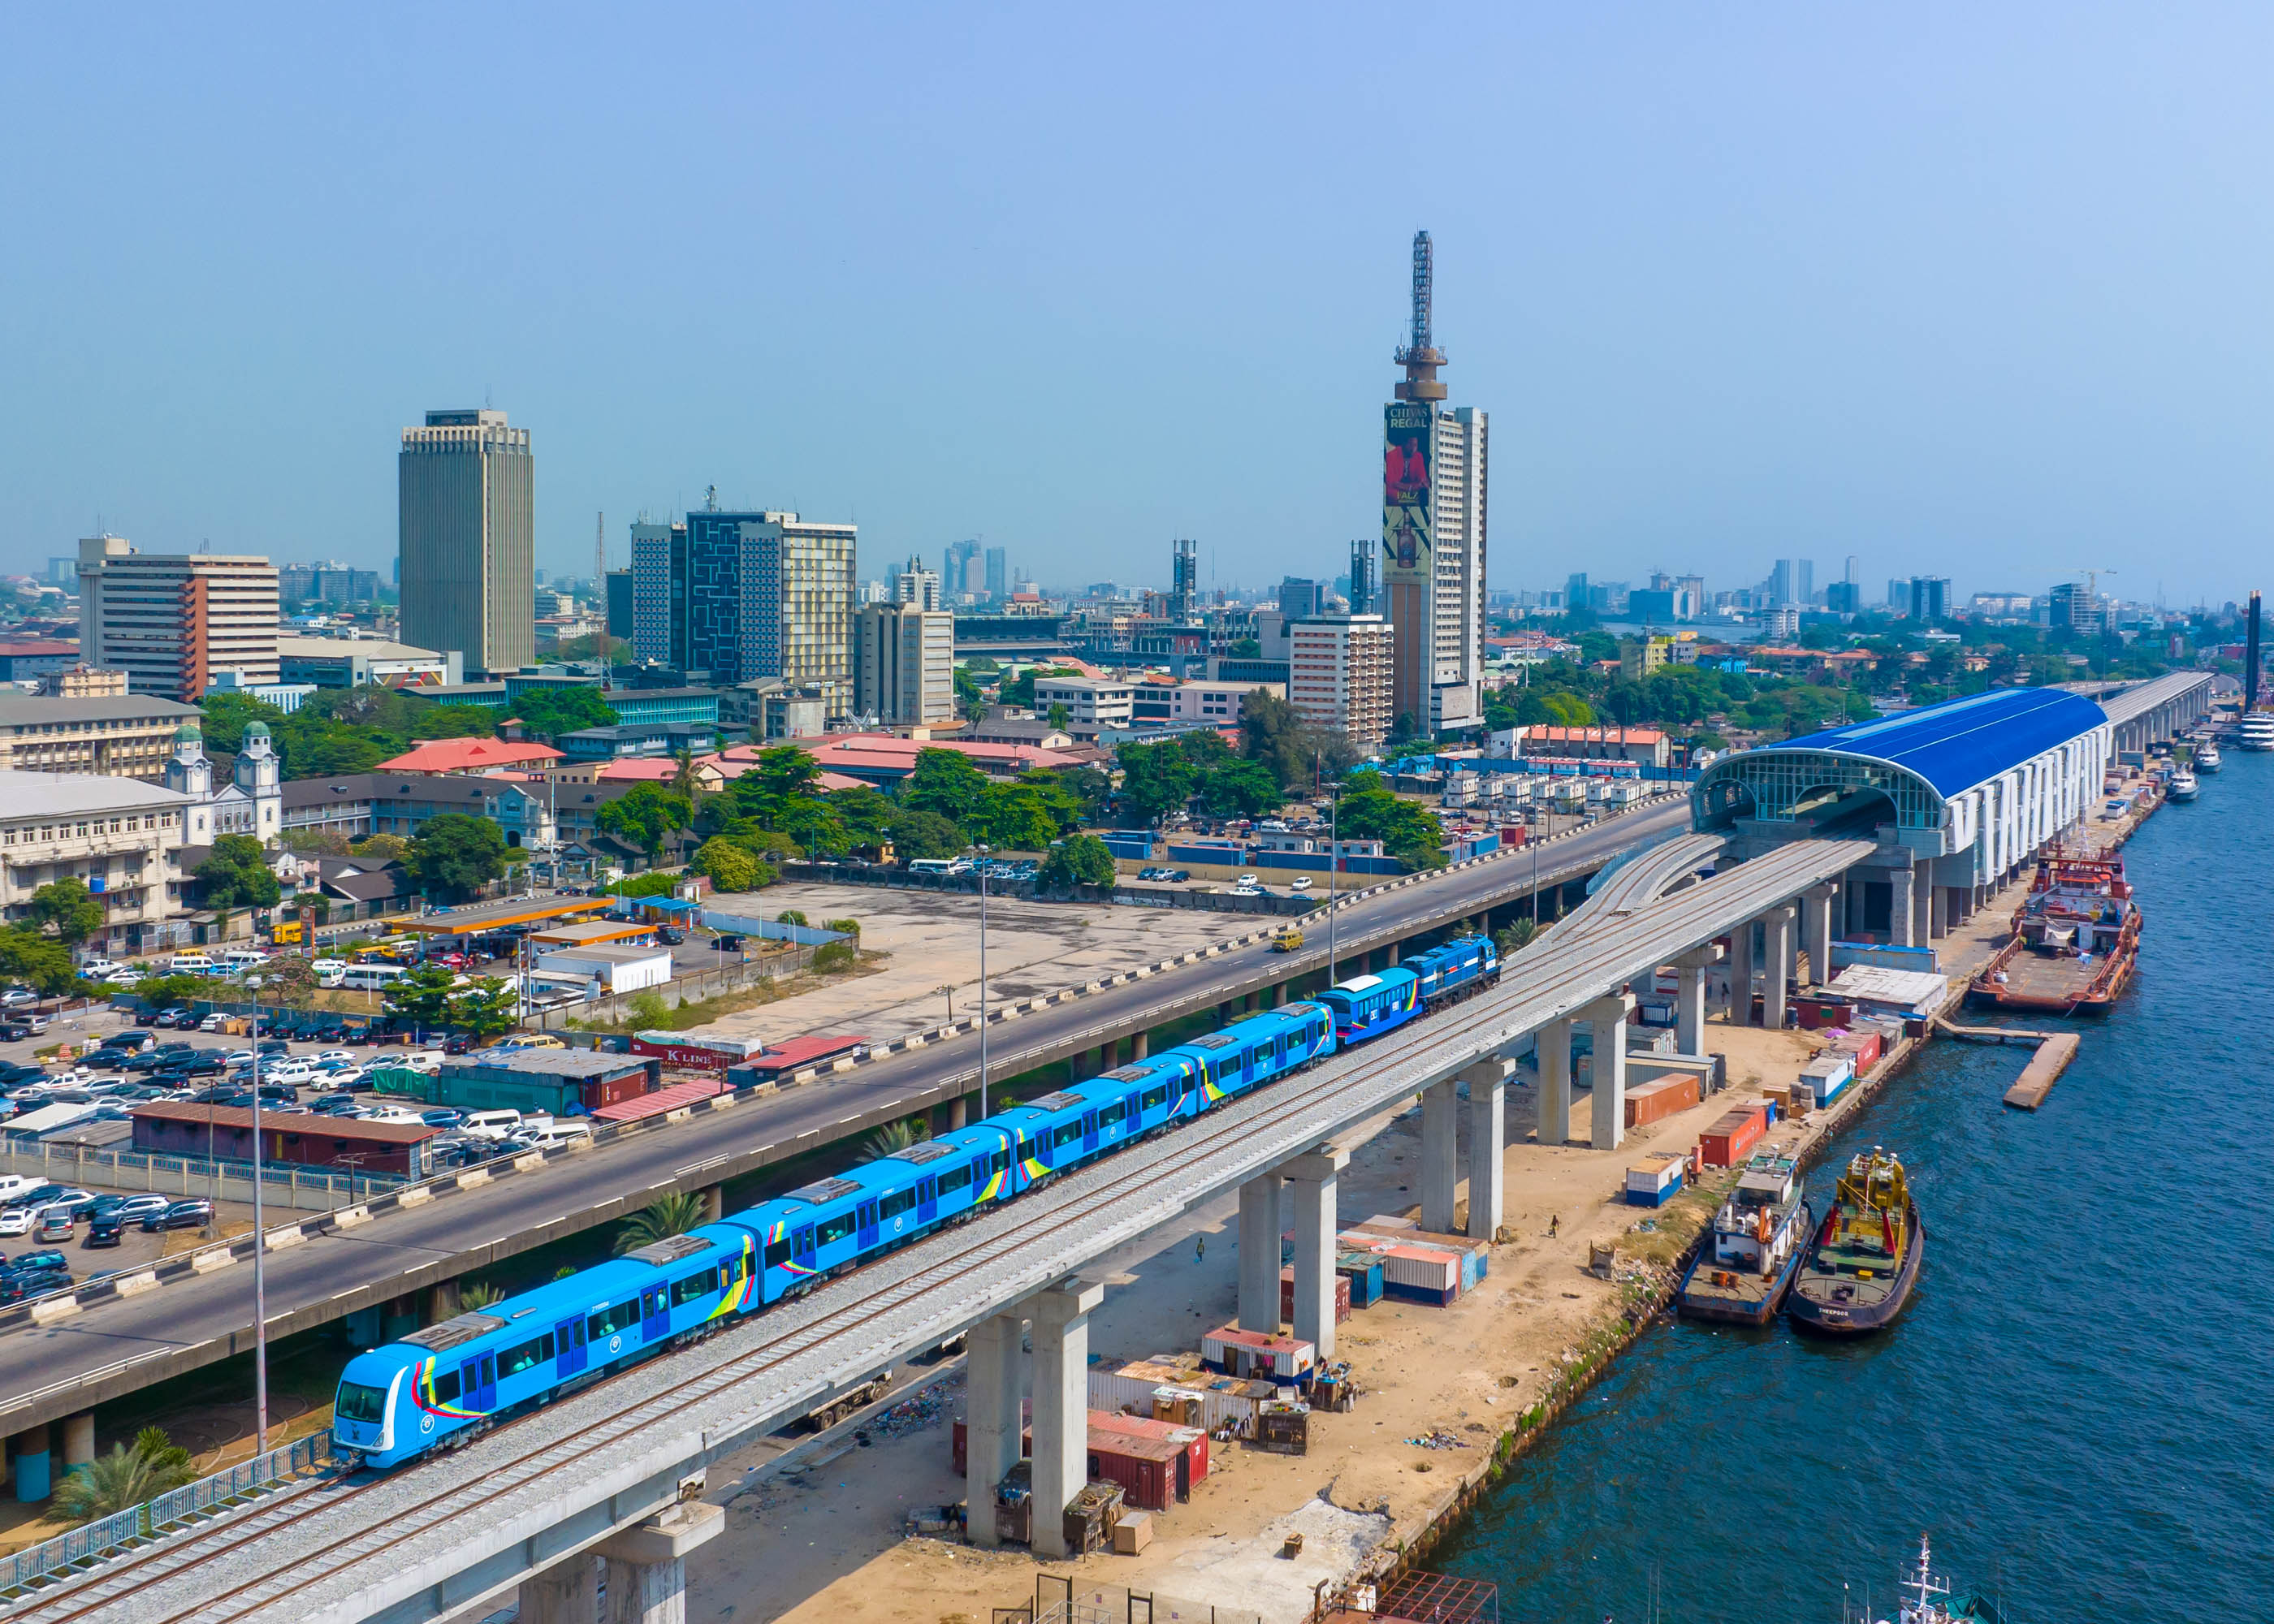 West Africa's first light rail network, built by a Chinese company CCECC, opens in Lagos, Nigeria. December 21, 2022. /CGTN